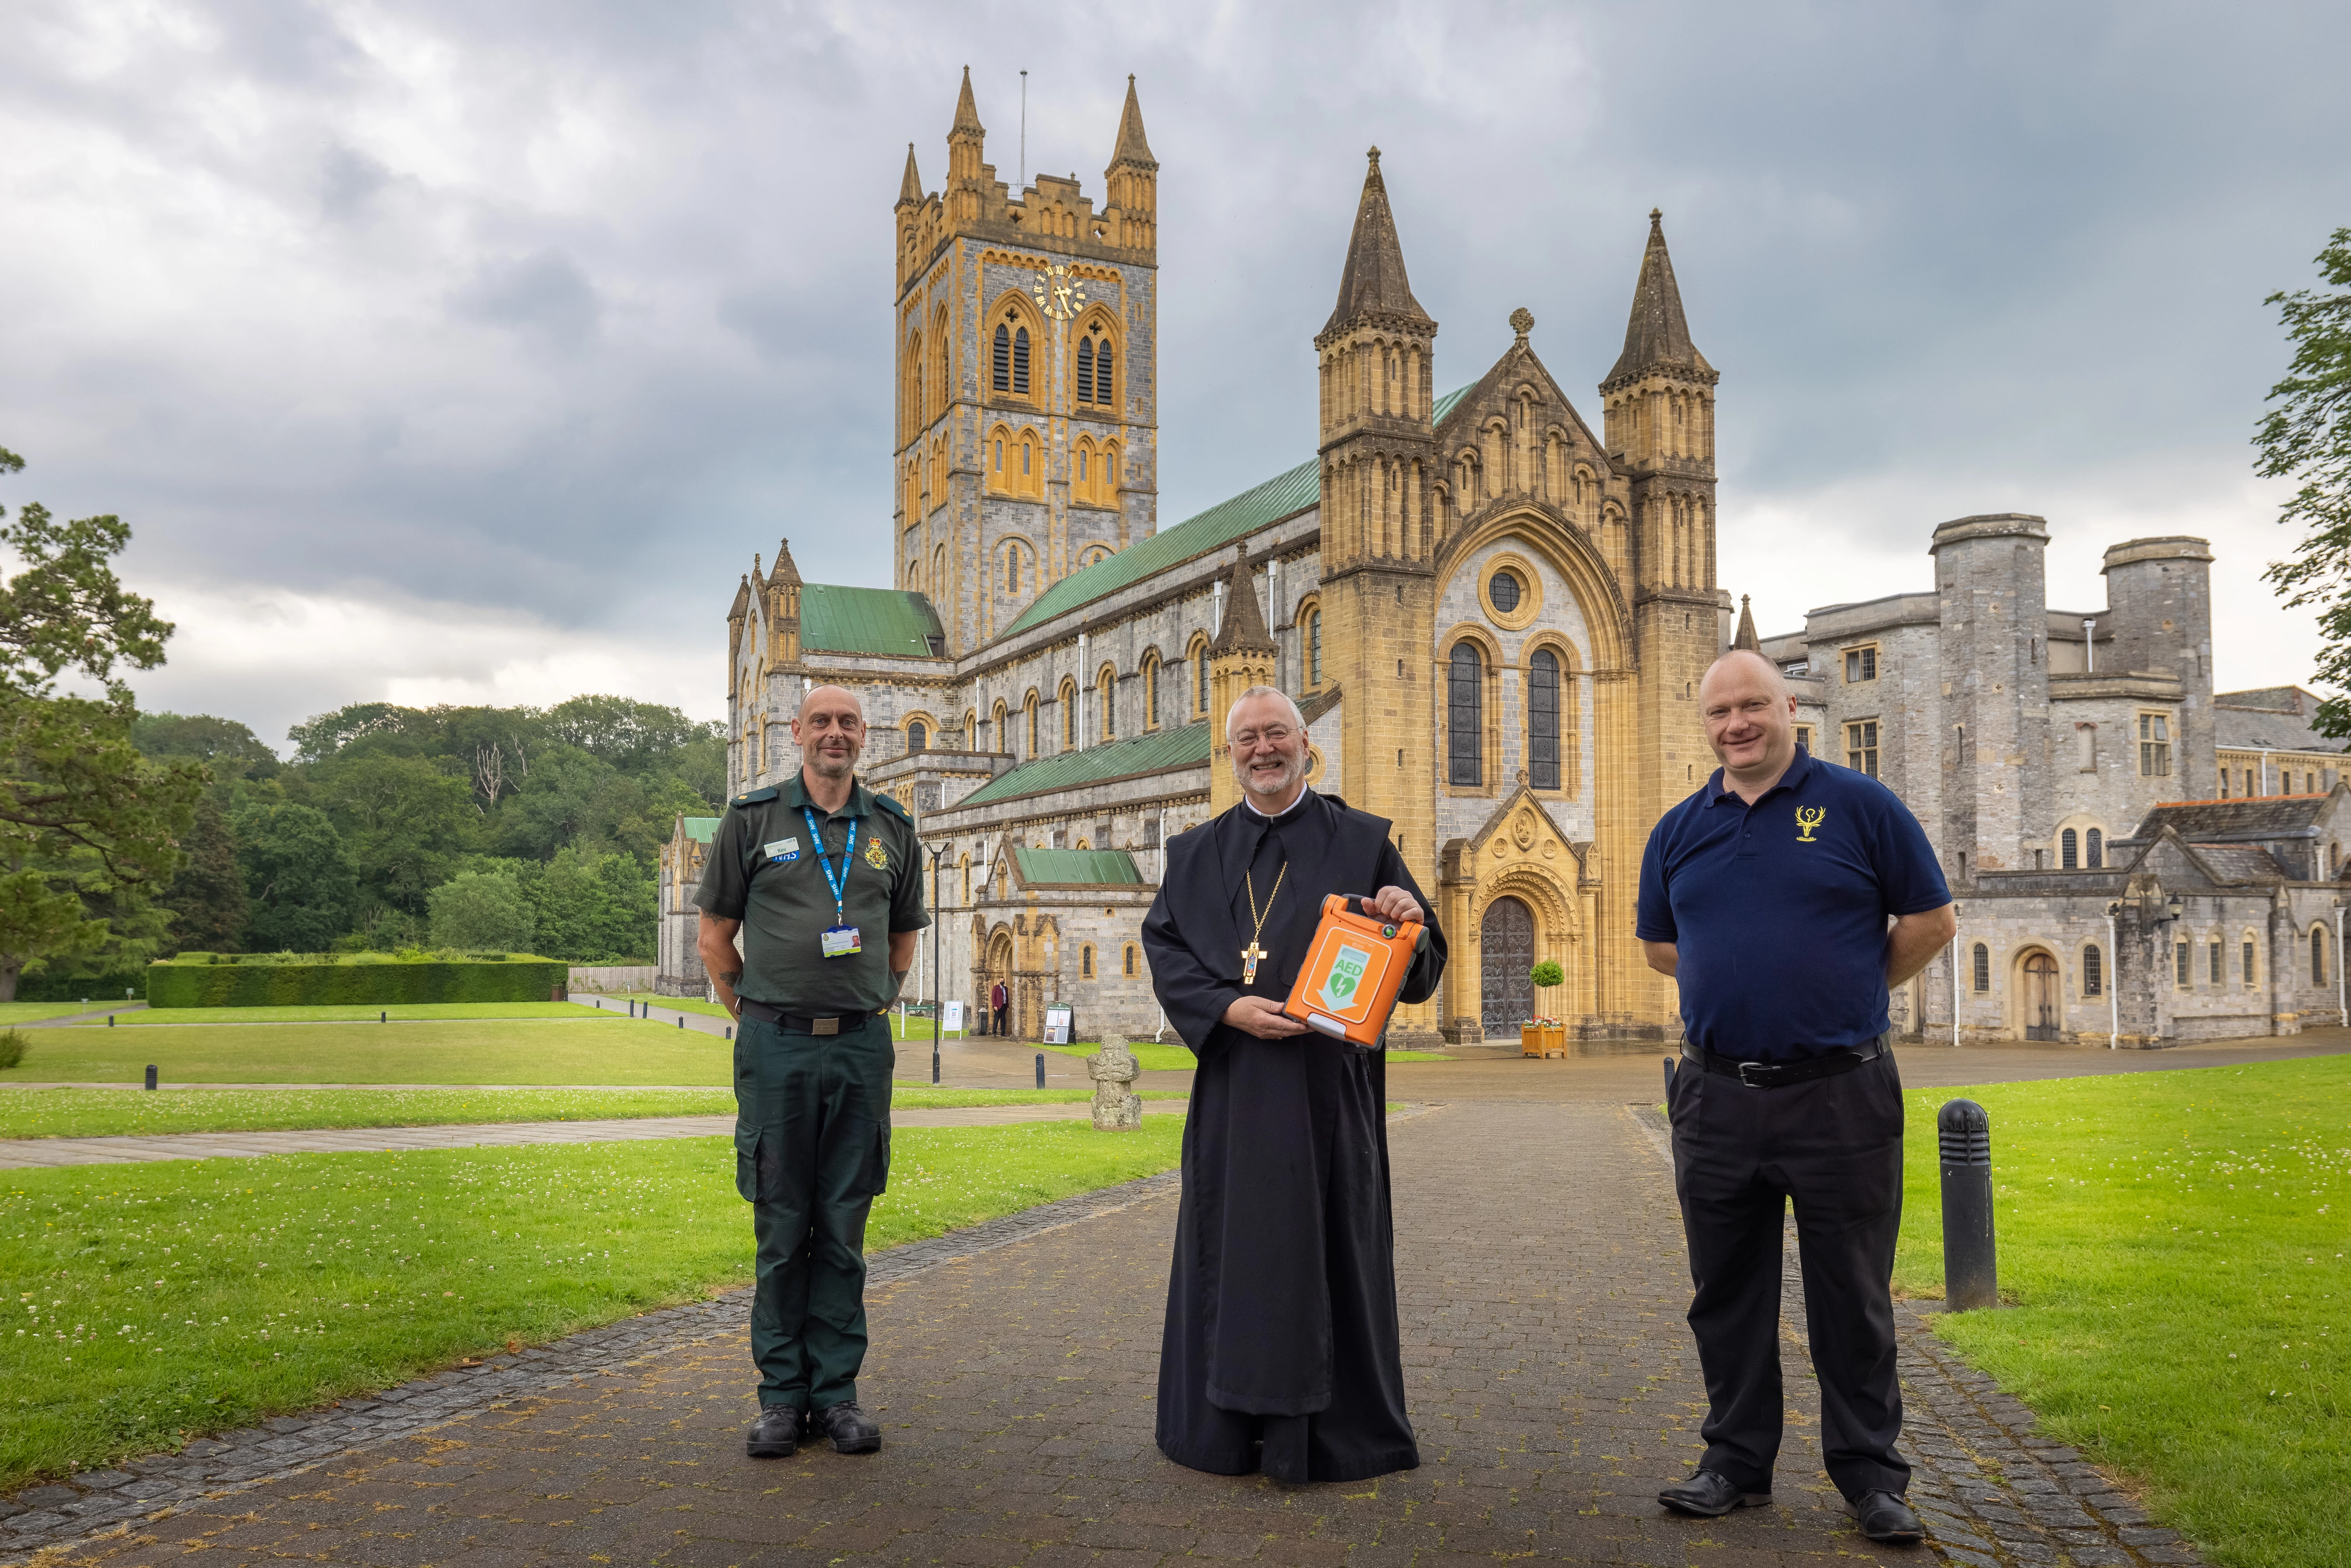 Kevin Bowyer, Assistant Community Responder Officer, South Western Ambulance Service Foundation Trust, South & West Devon Abbot David Charlesworth, Buckfast Abbey Ian Stone, Health and Safety Officer at Buckfast Abbey